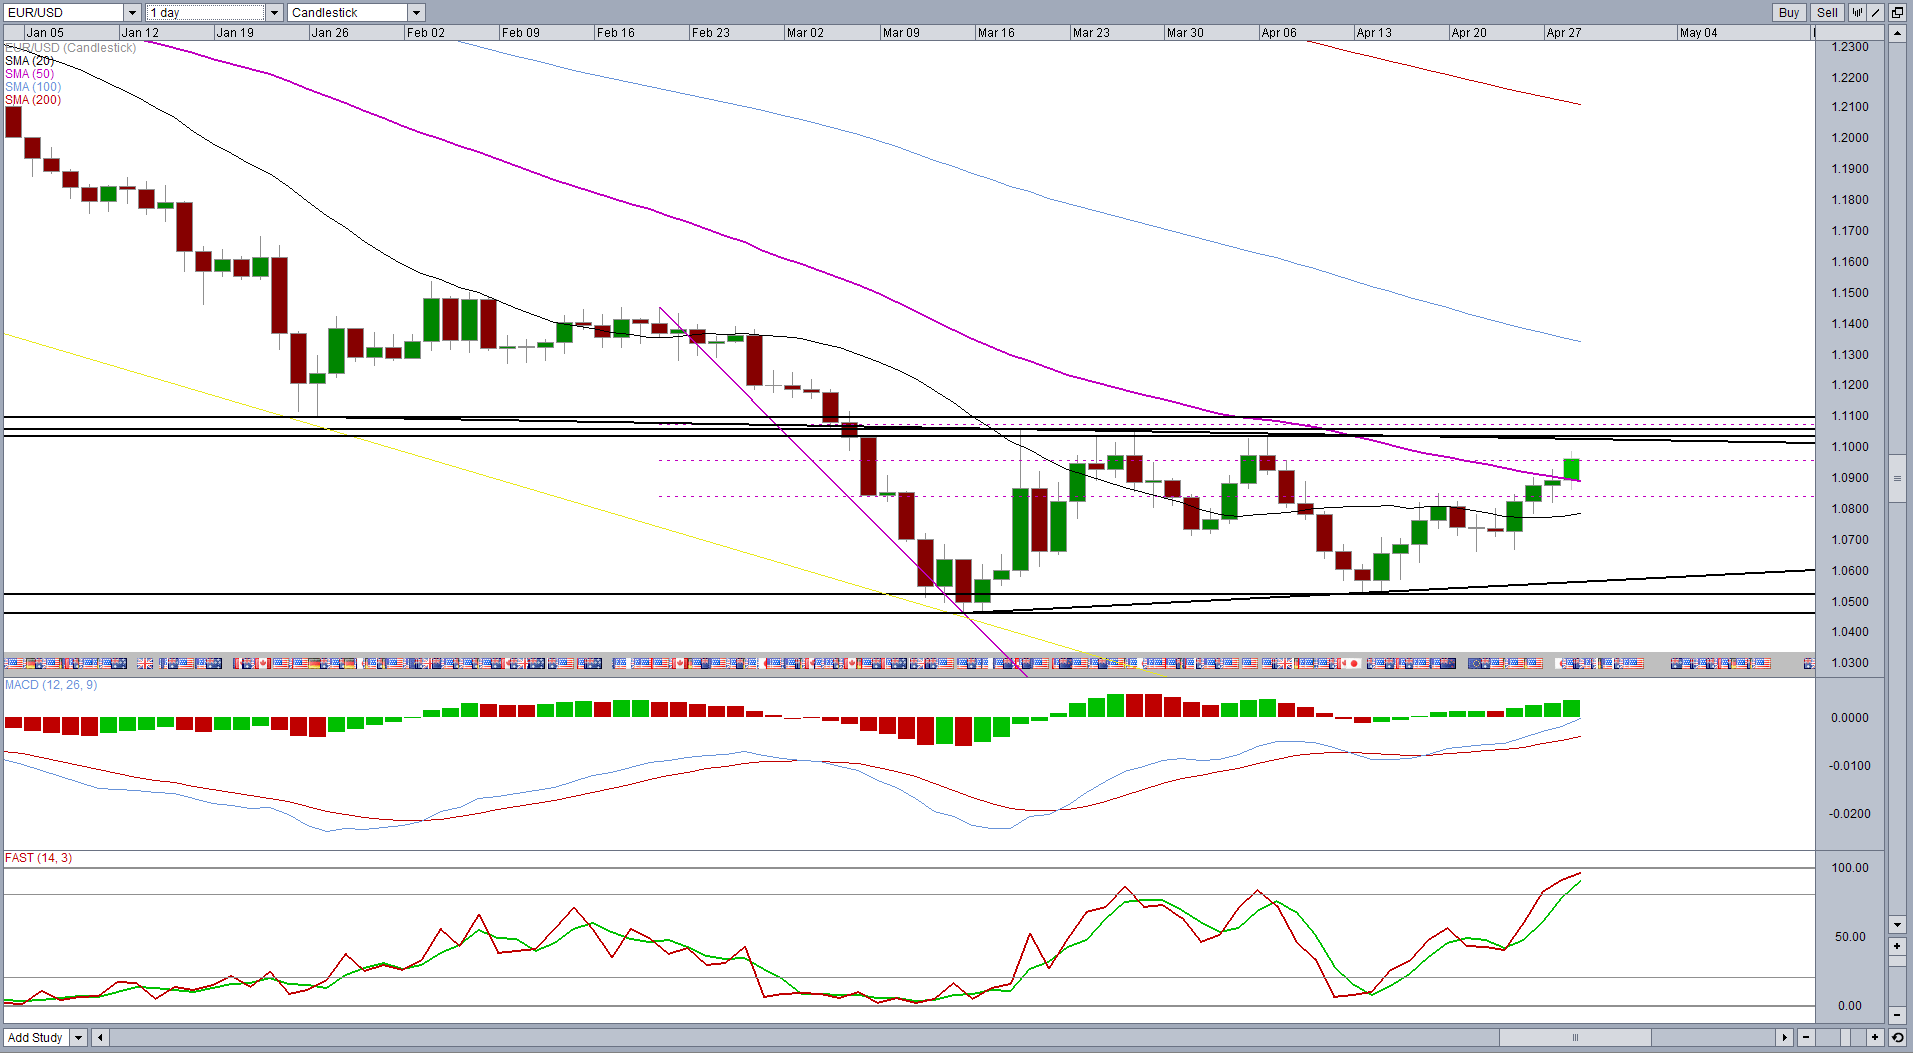 EUR/USD: Daily